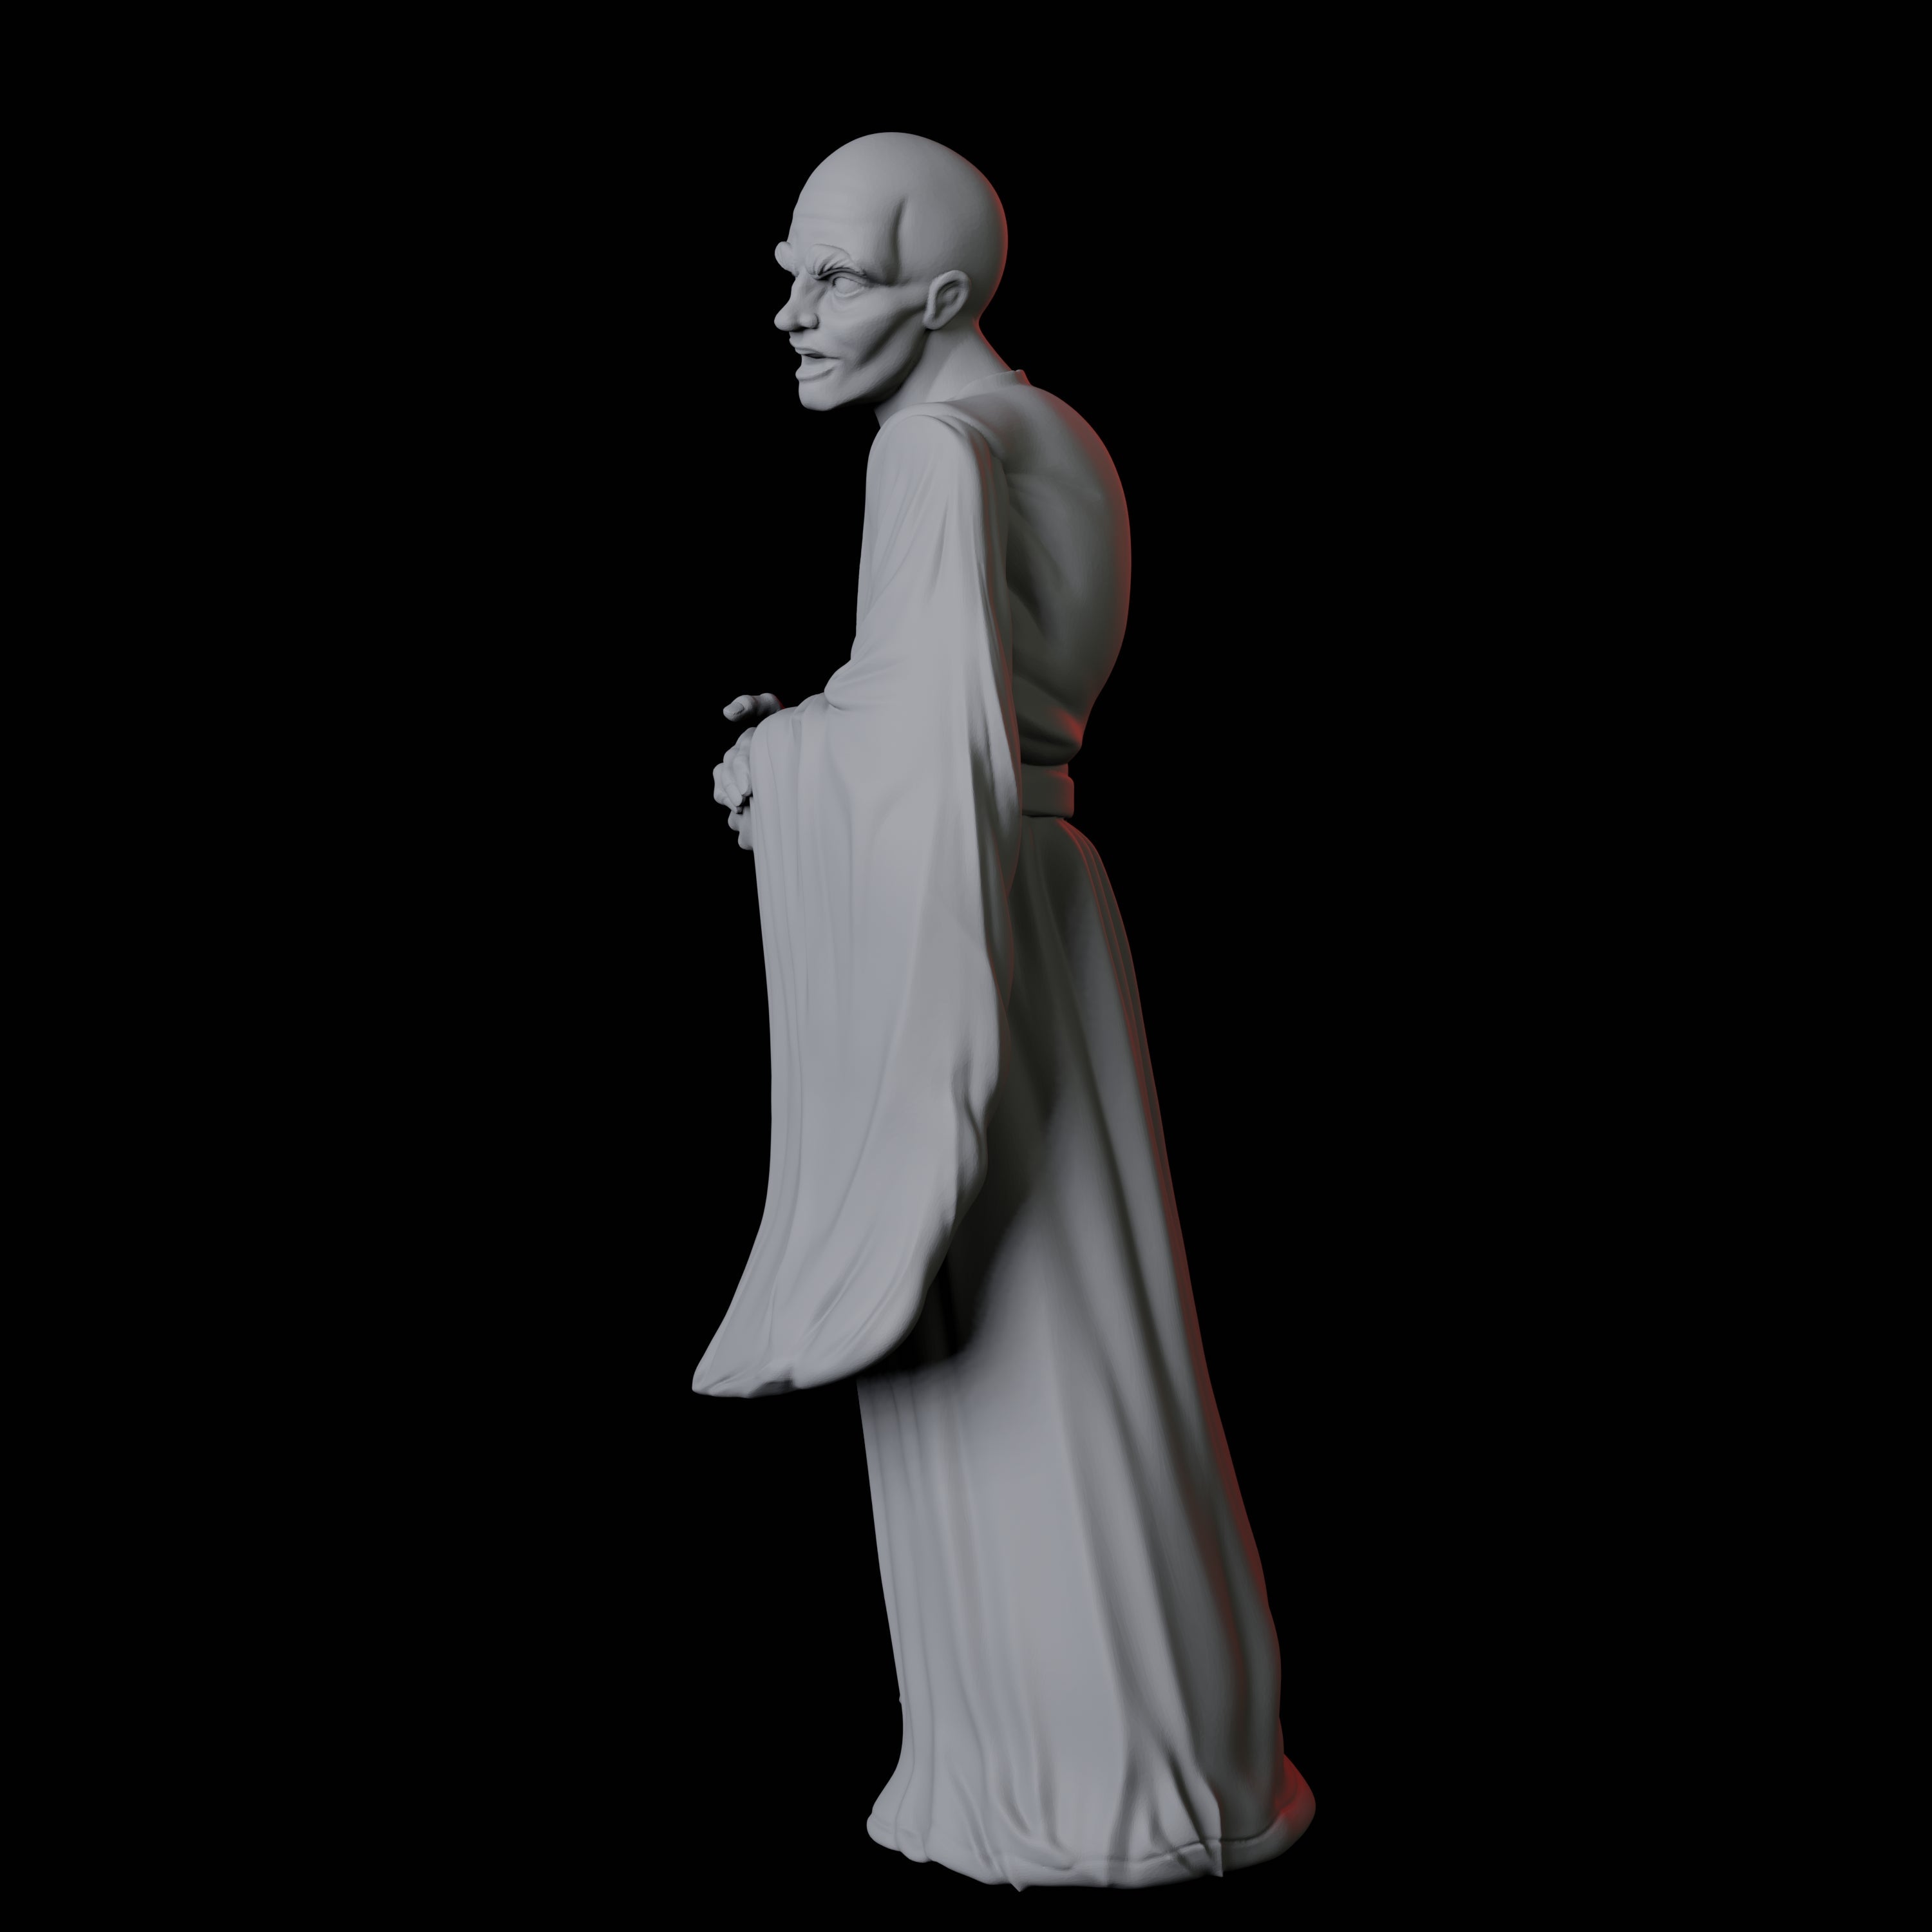 Pensive Monk Counsellor Miniature for Dungeons and Dragons, Pathfinder or other TTRPGs